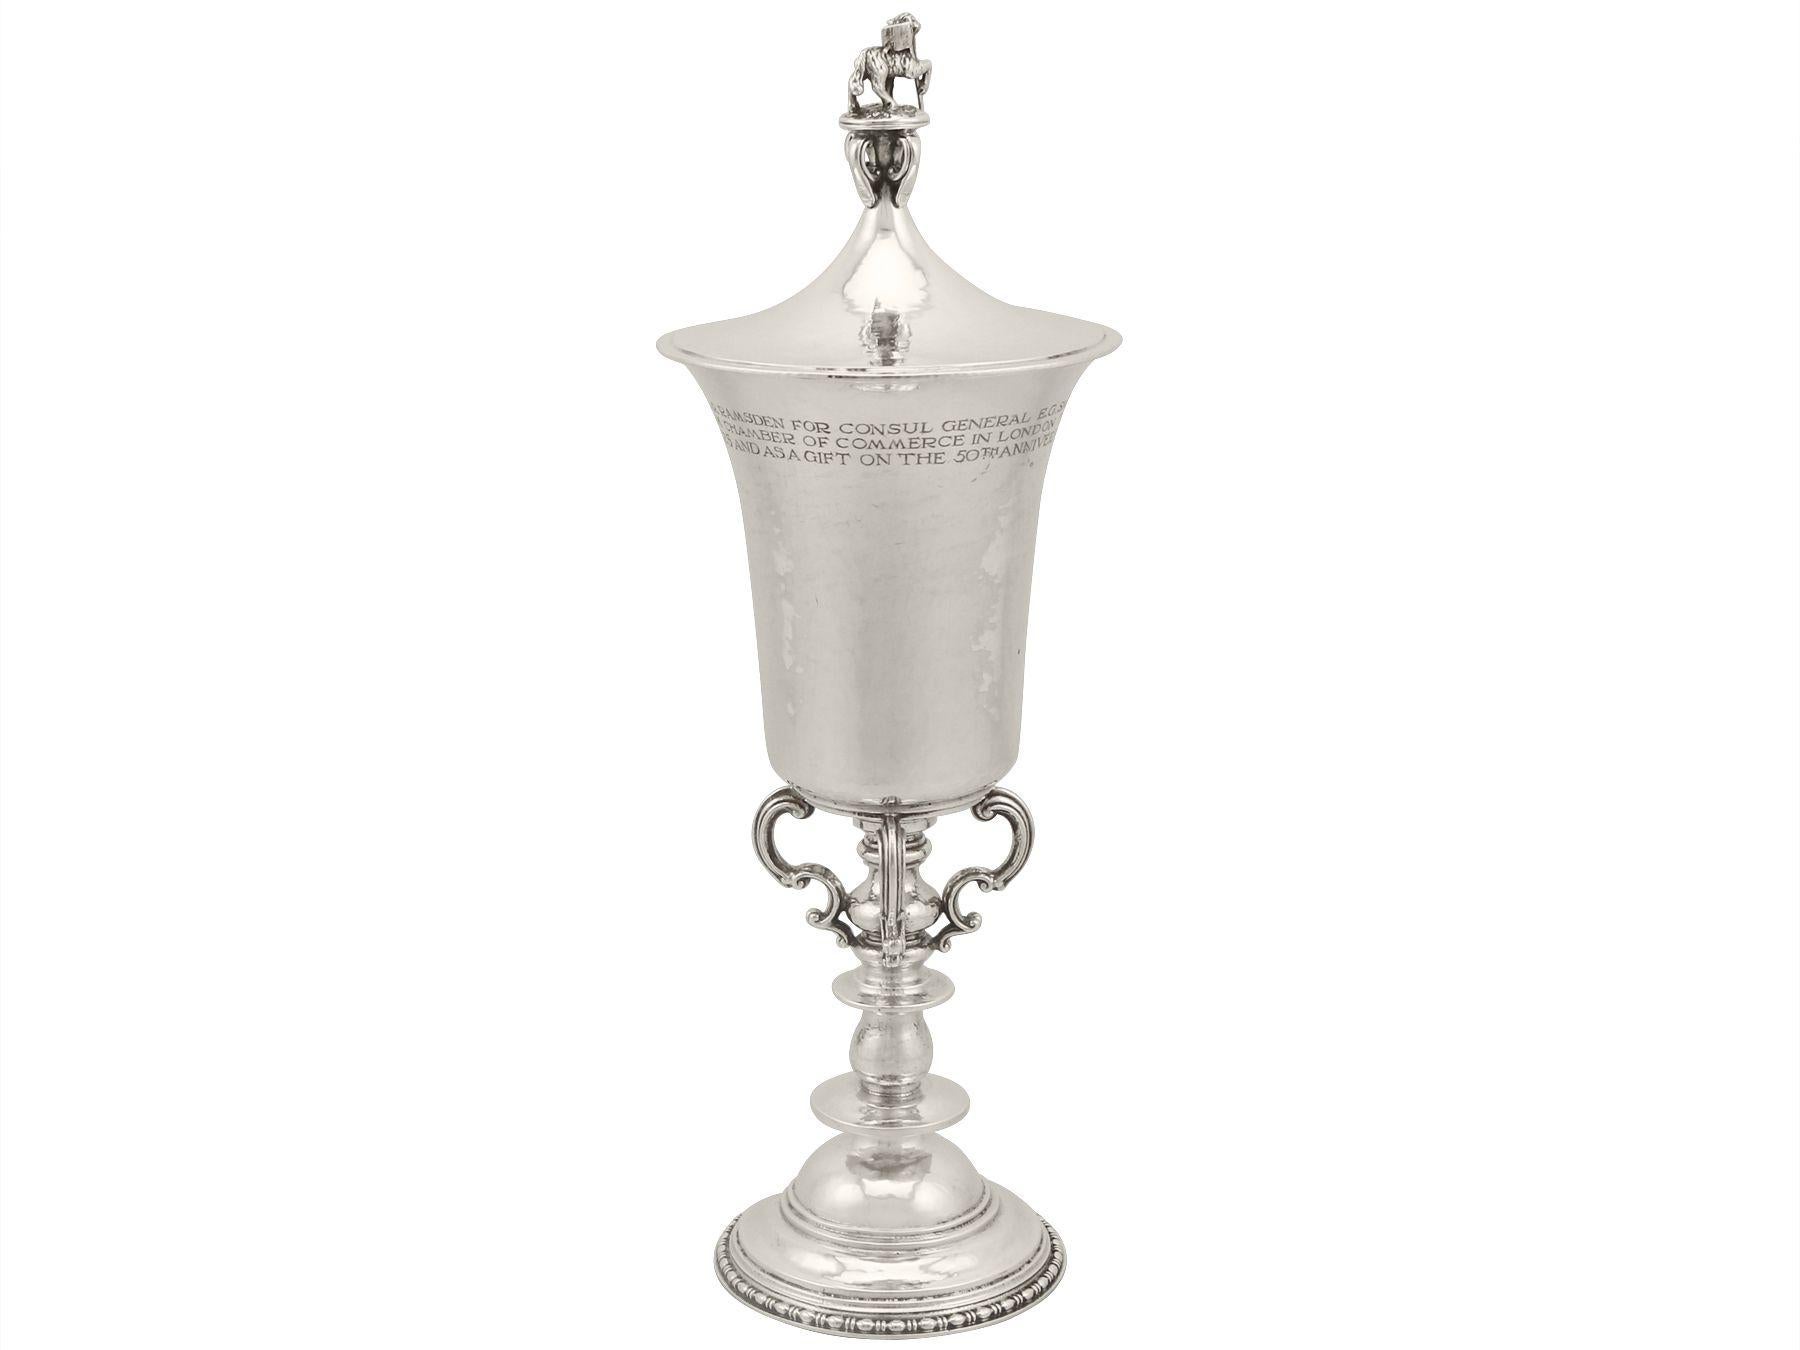 An exceptional, fine and impressive antique George V English sterling silver cup and cover made by Omar Ramsden; an addition to our diverse presentation silverware collection

This exceptional, fine and impressive antique silver cup and cover has